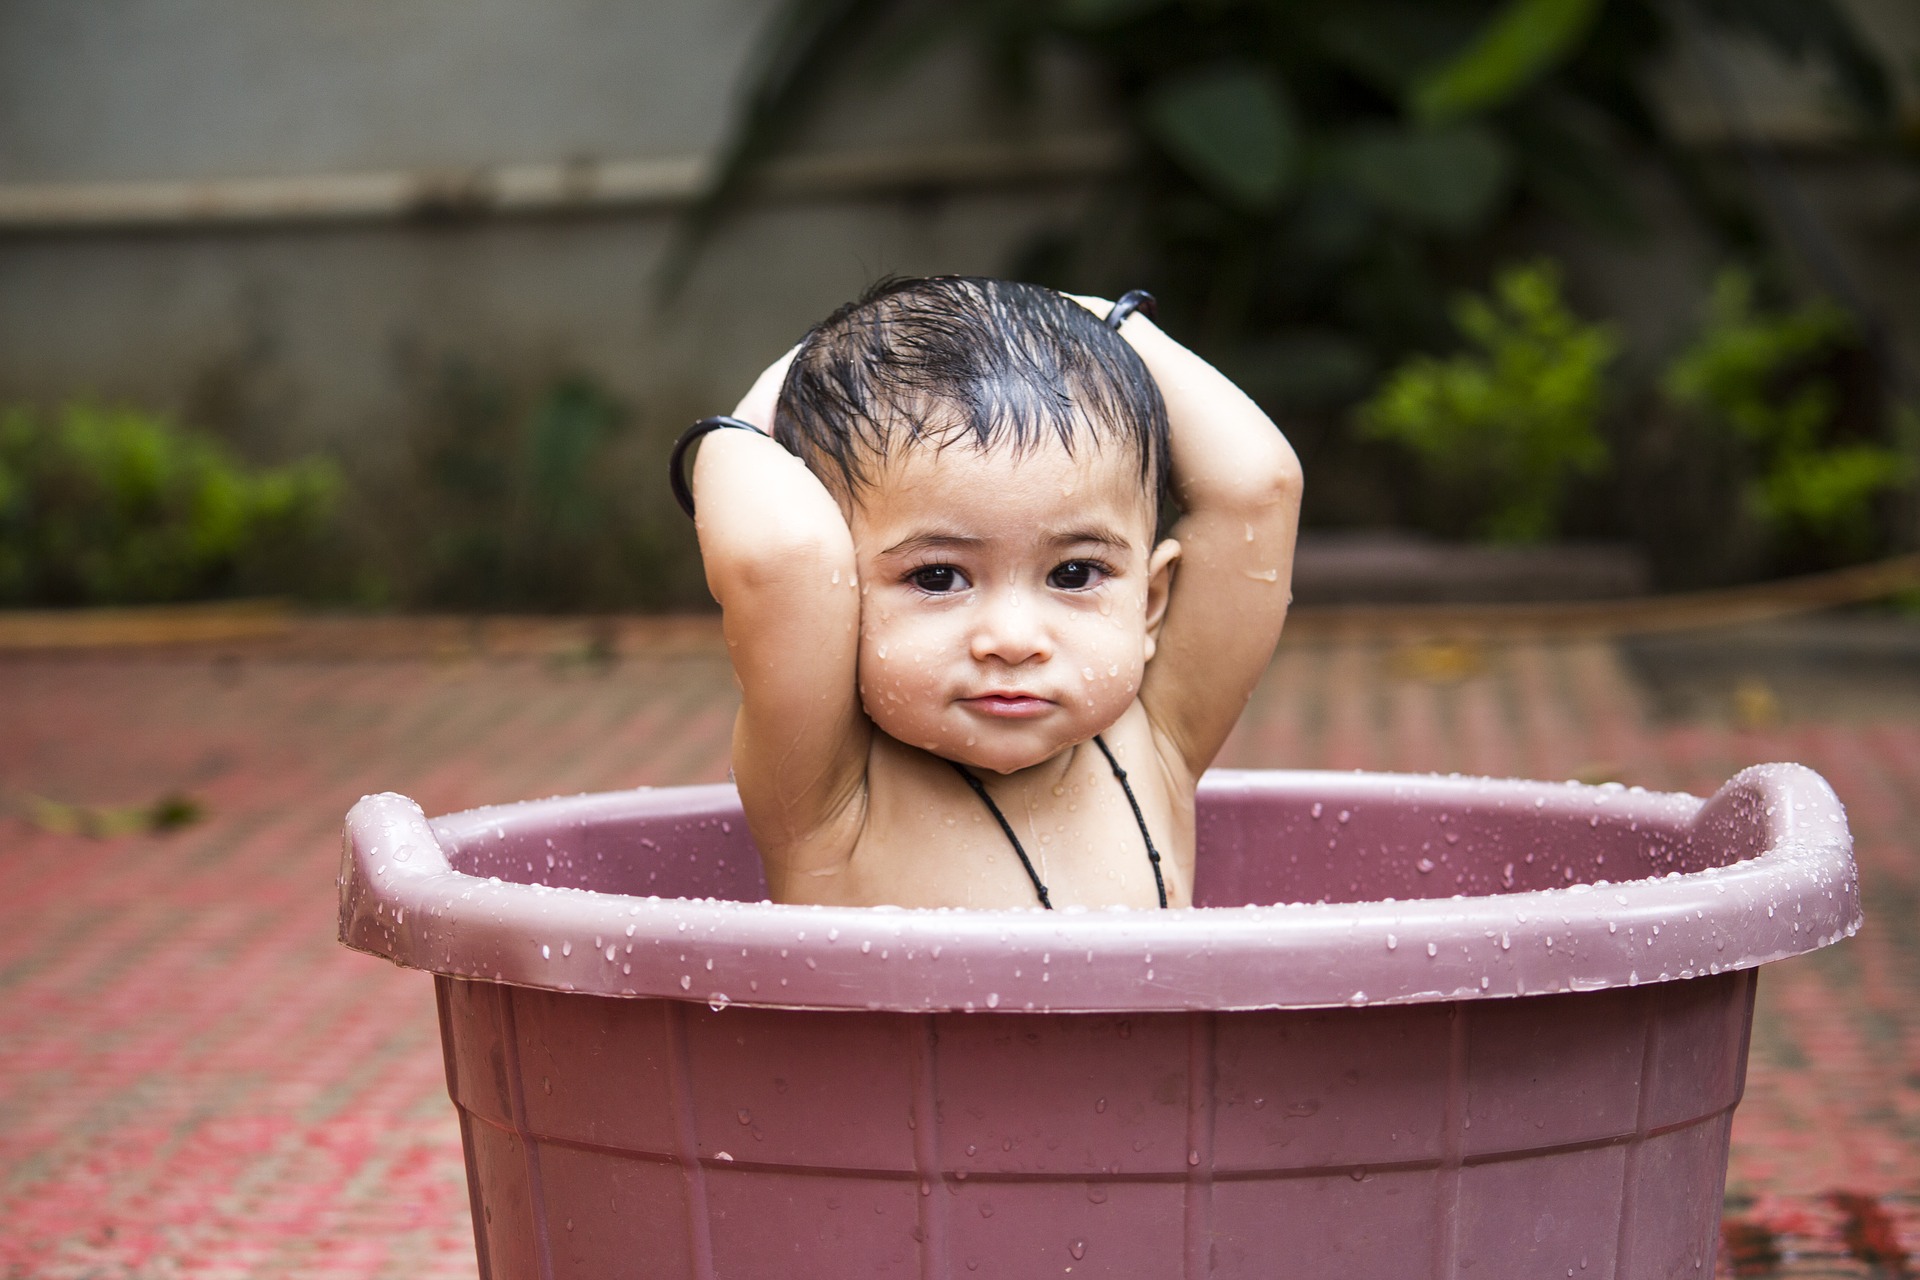 Smart Tips On Making Your Baby’s Bath Time Much Safer